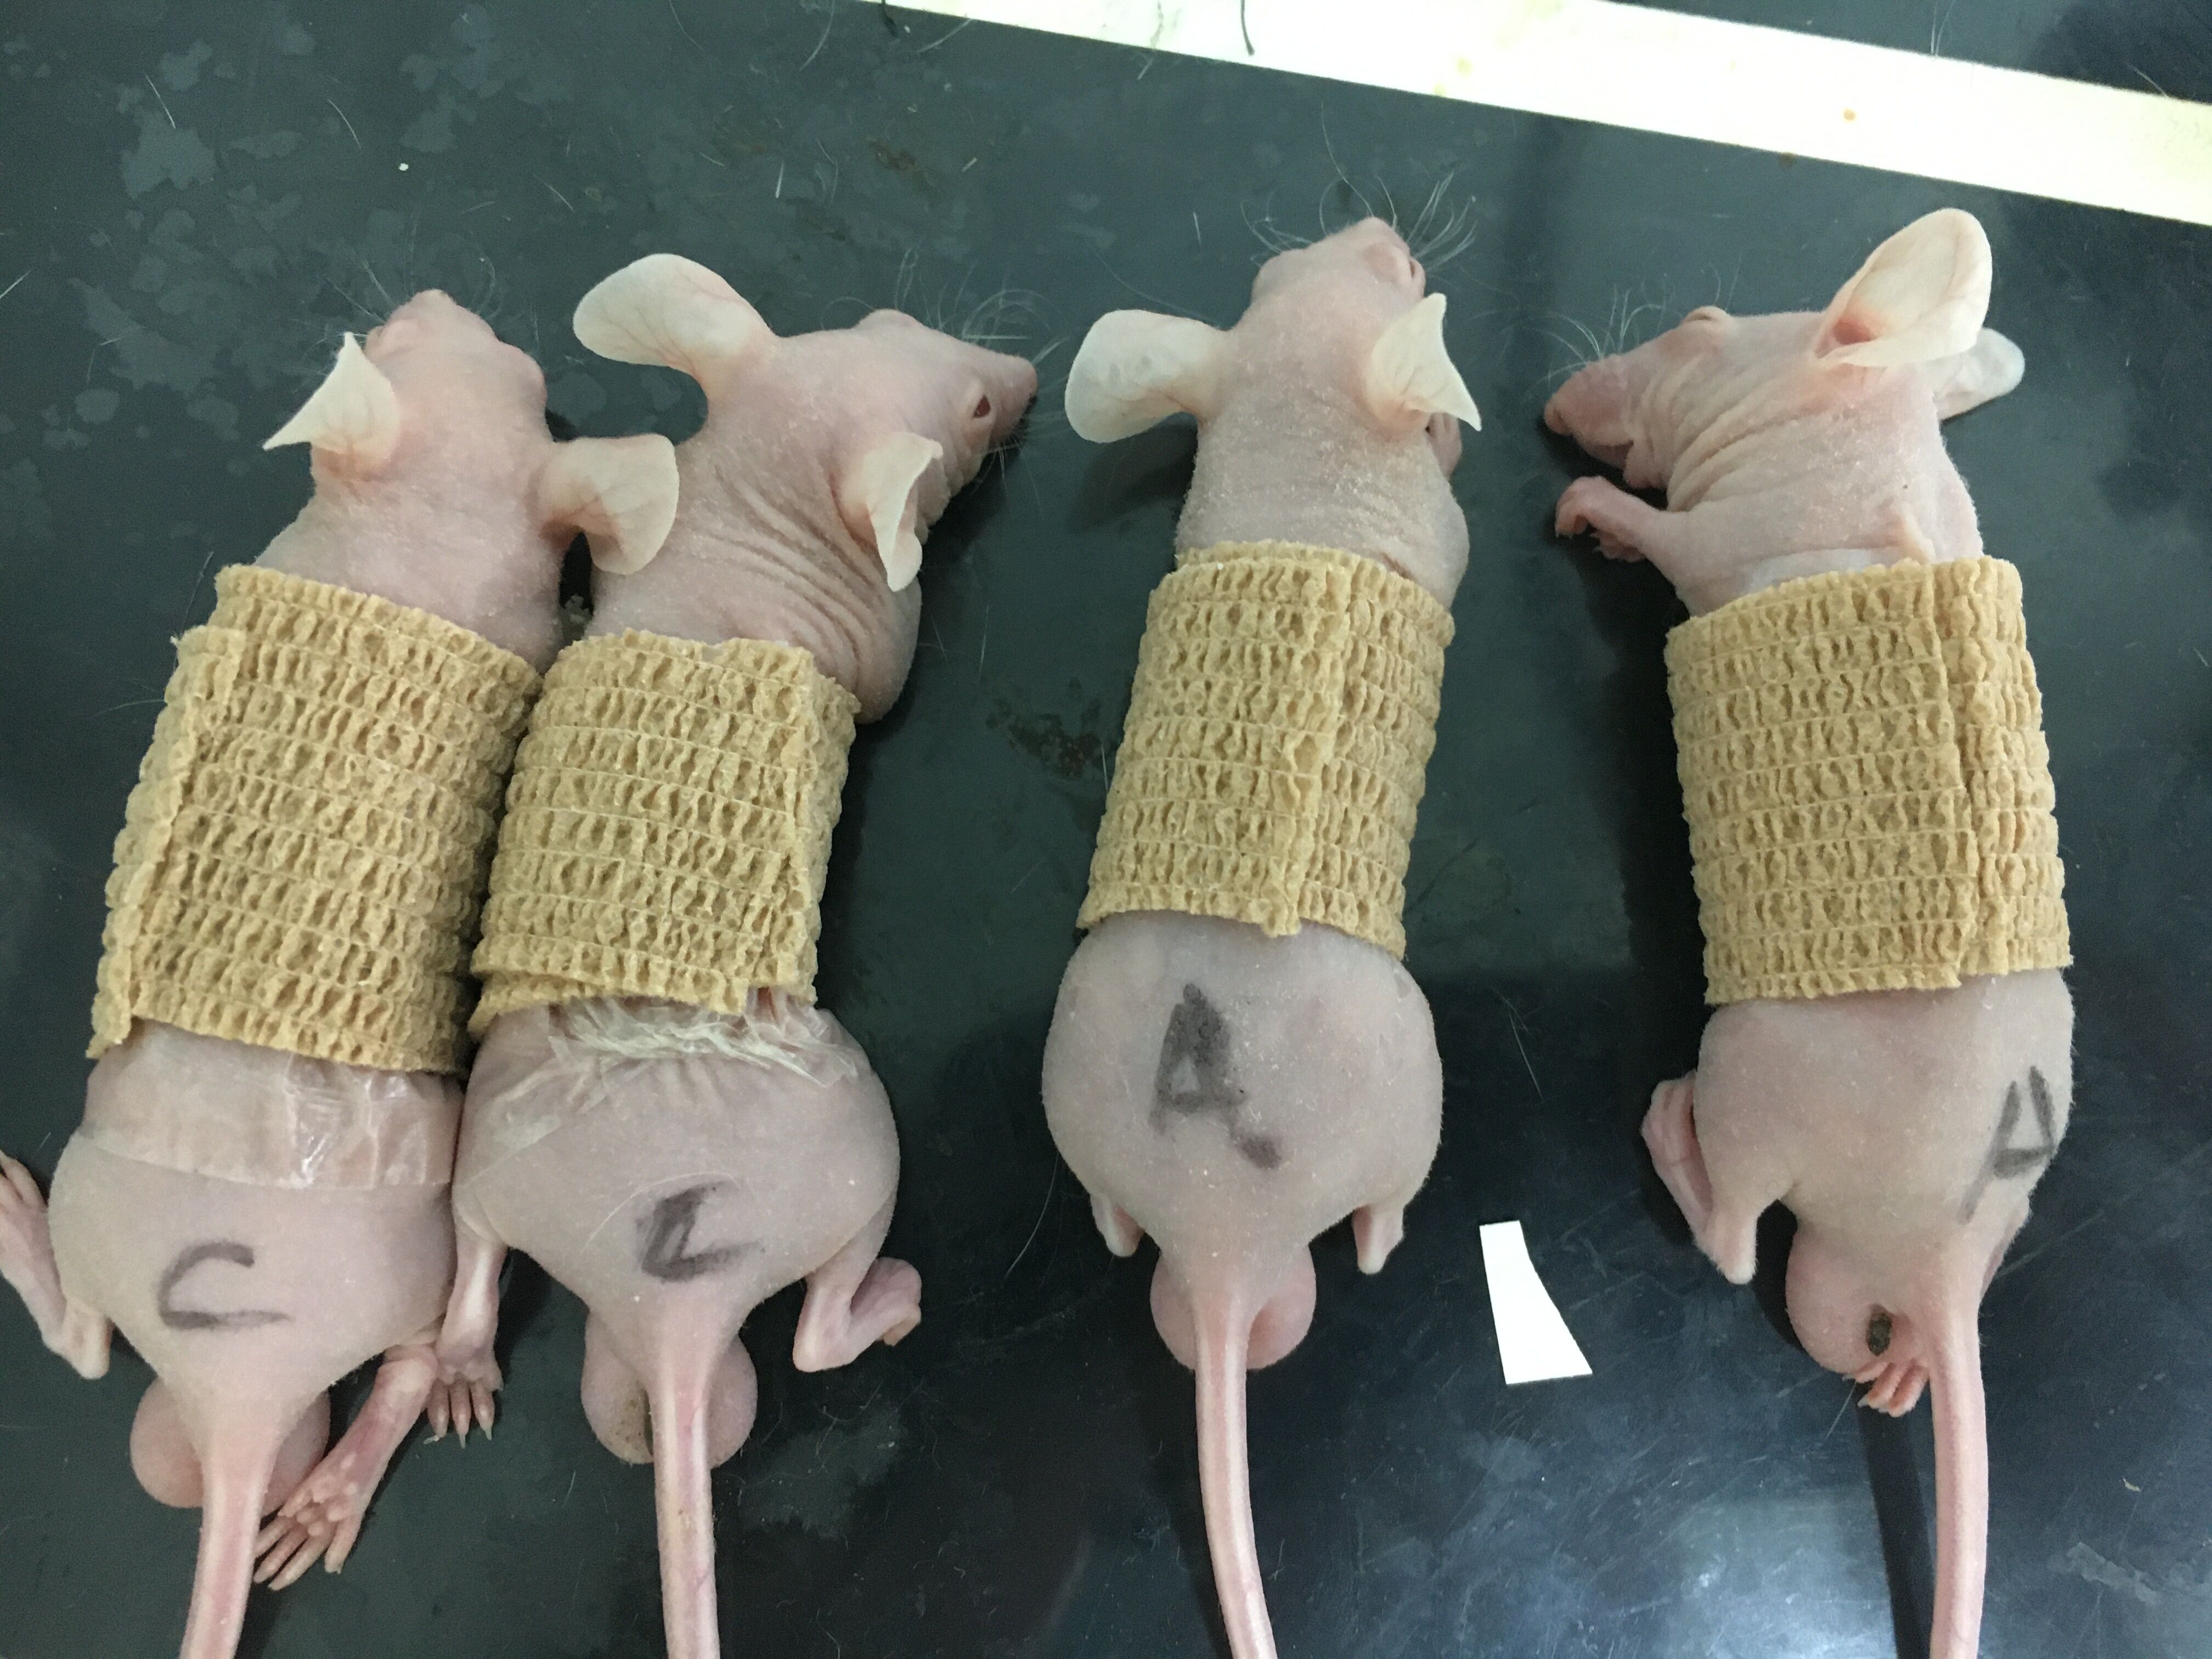 Wound modeling and stem cell transplantation in nude mice